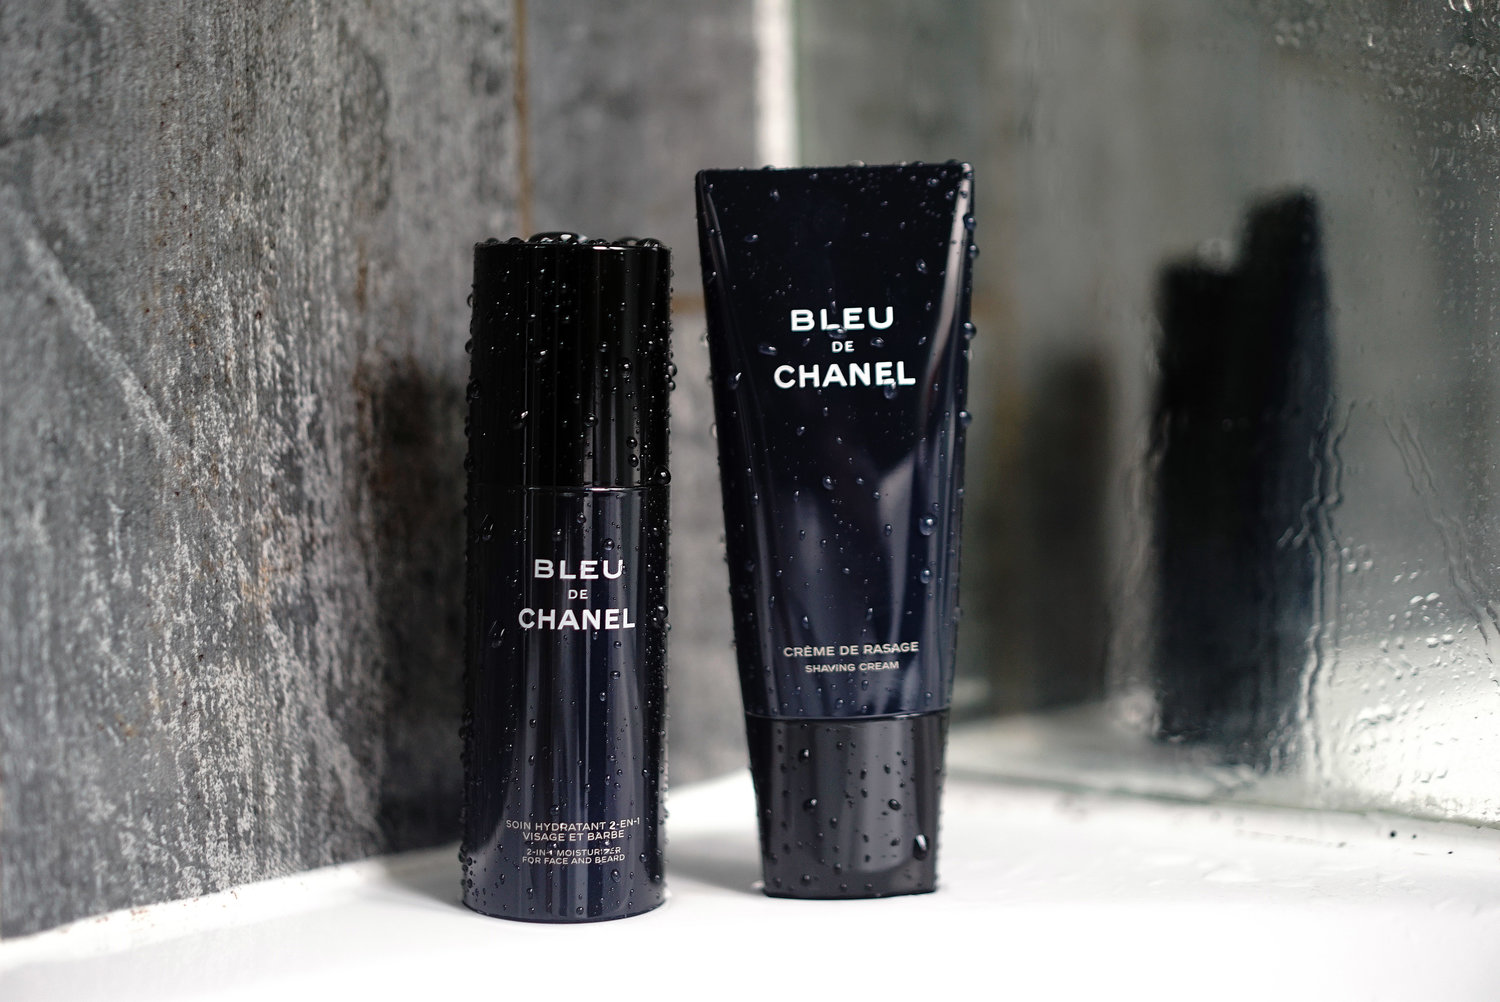 BLEU DE CHANEL Grooming Essentials, skin, BLEU DE CHANEL After Shave Balm.  Soothes and refreshes skin. #GroomingEssentials #BleuDeChanel, By CHANEL